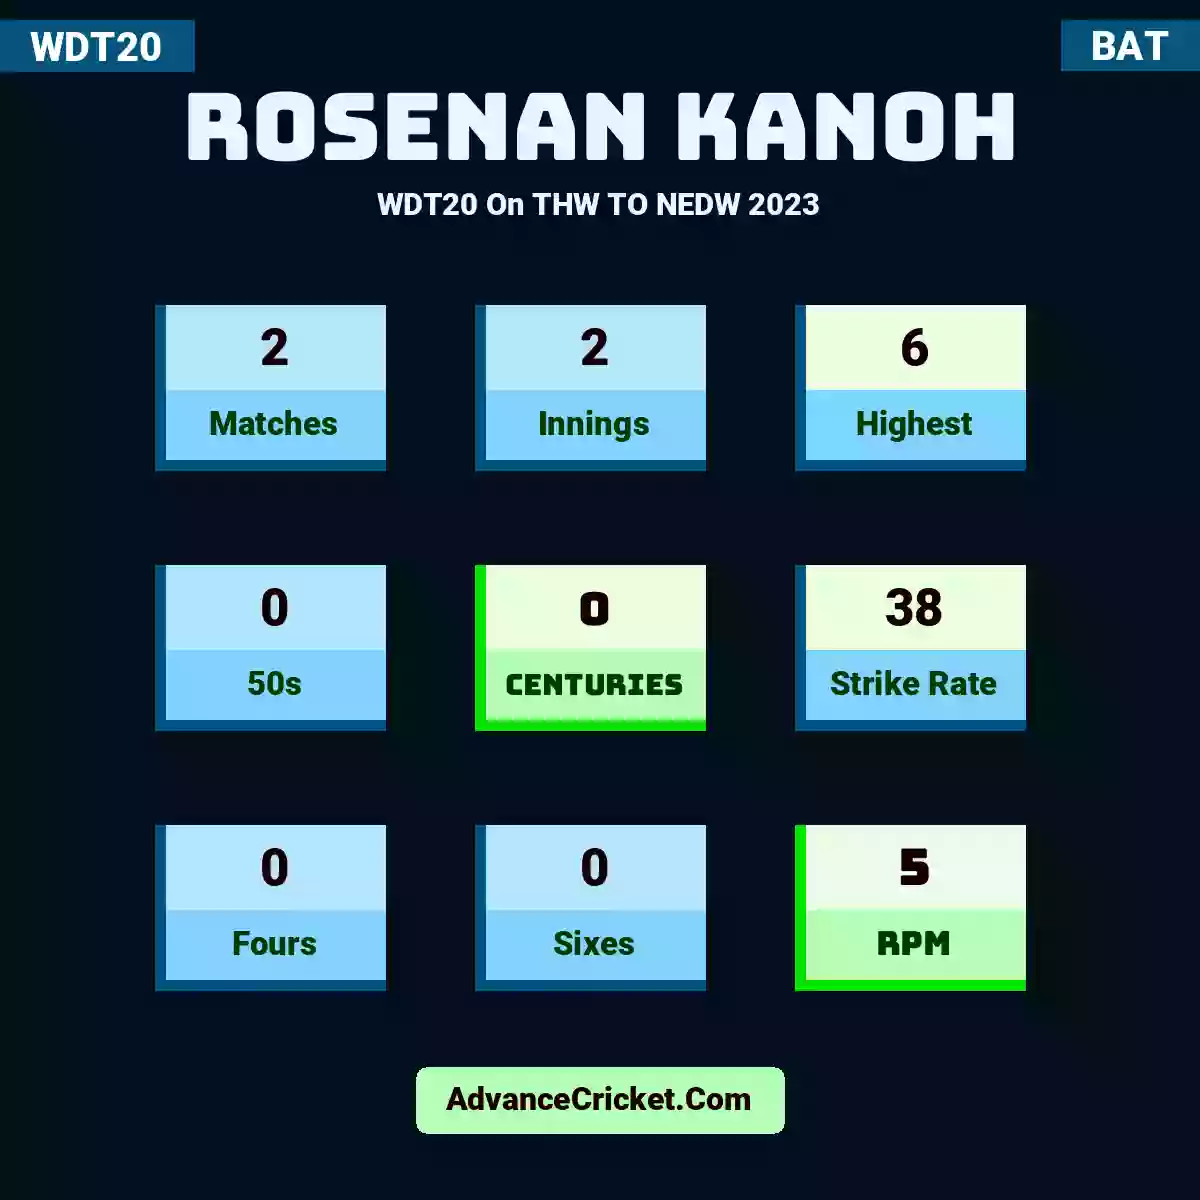 Rosenan Kanoh WDT20  On THW TO NEDW 2023, Rosenan Kanoh played 2 matches, scored 6 runs as highest, 0 half-centuries, and 0 centuries, with a strike rate of 38. R.Kanoh hit 0 fours and 0 sixes, with an RPM of 5.